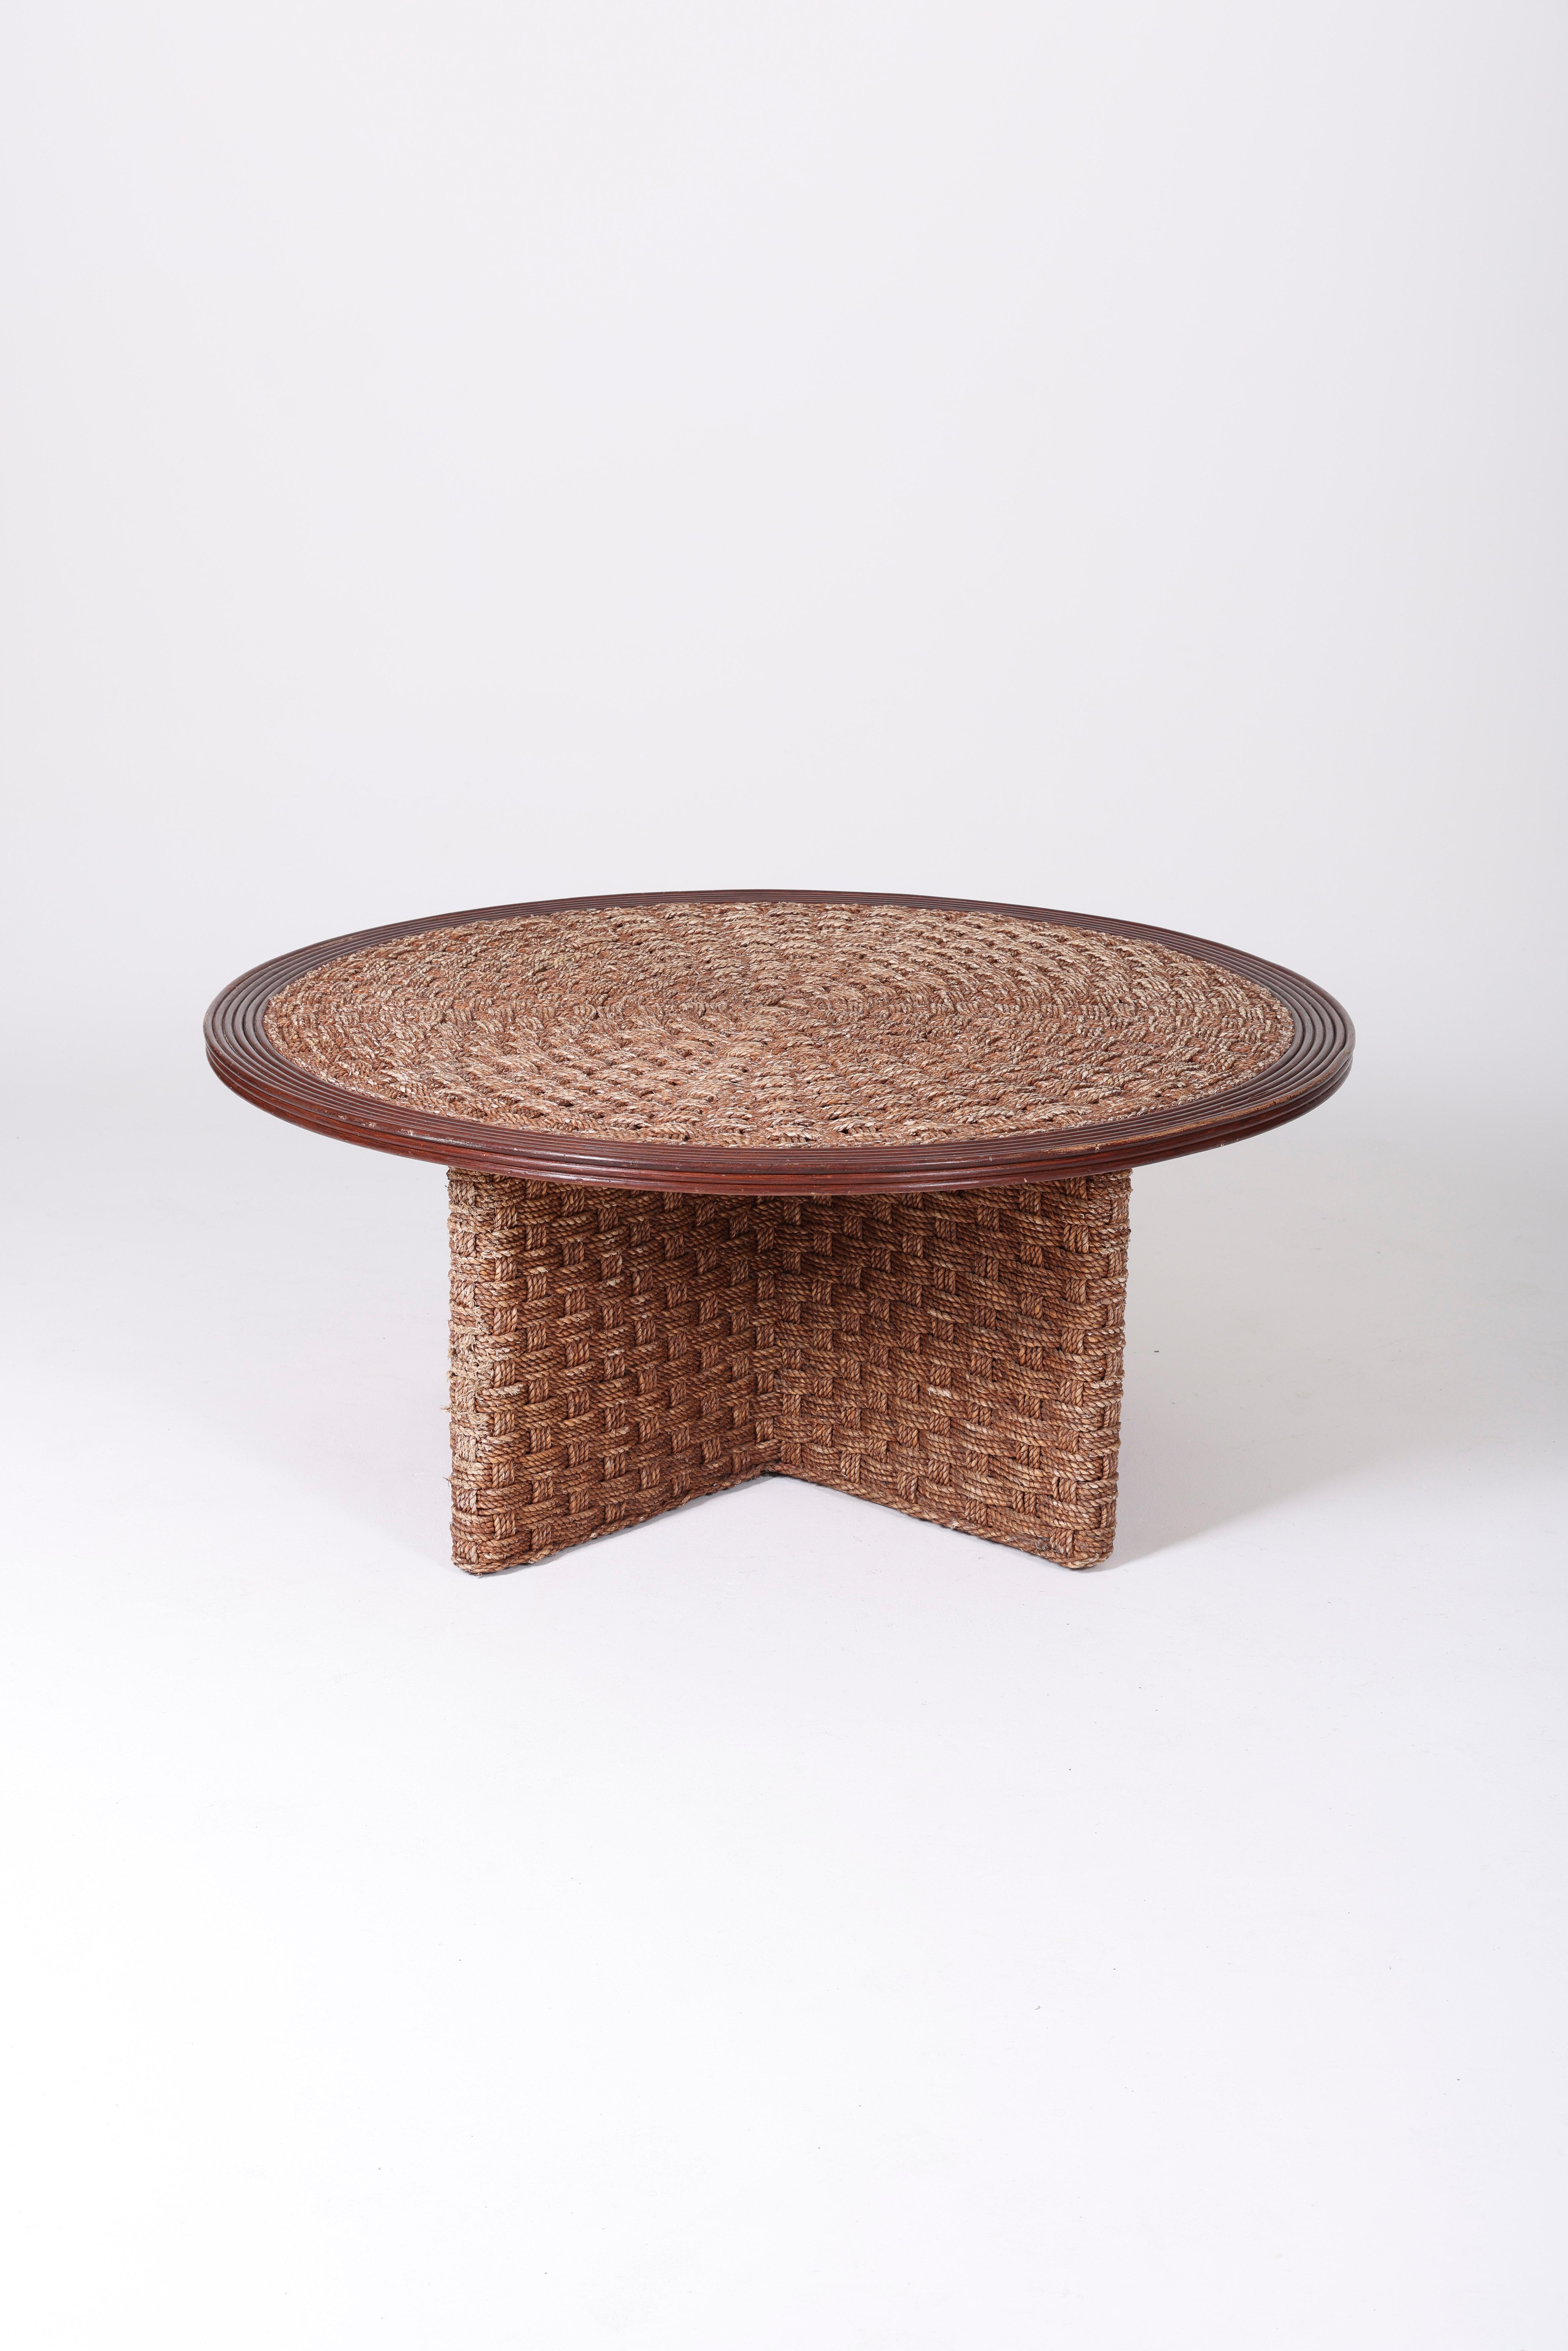 Rope Coffee table and stools in woven rope and wood, mid-20th century For Sale